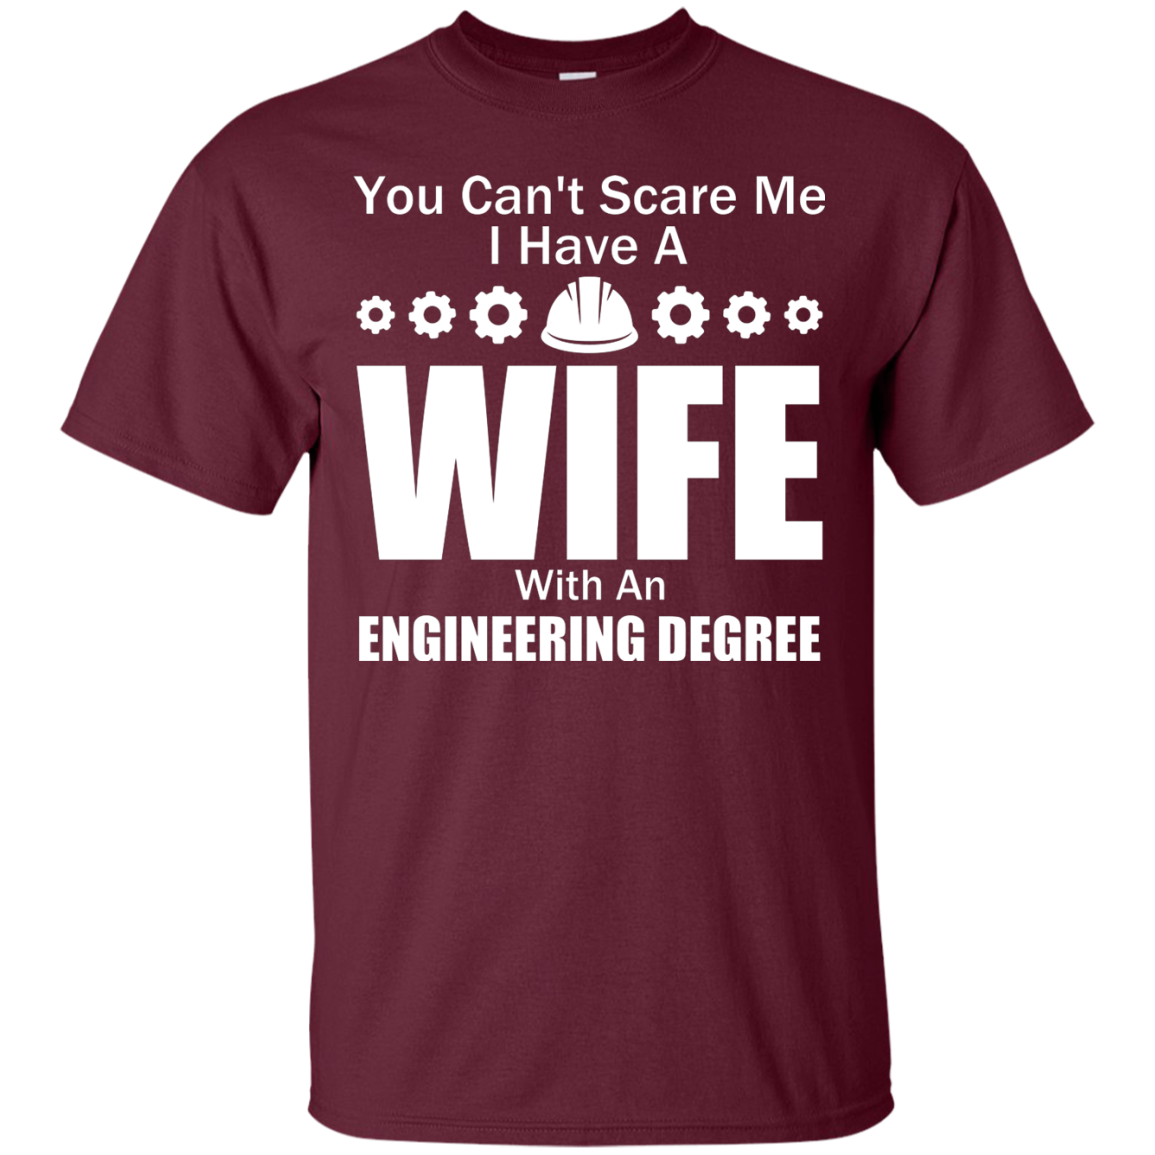 You Can't Scare Me - I Have A Wife With An Engineering Degree